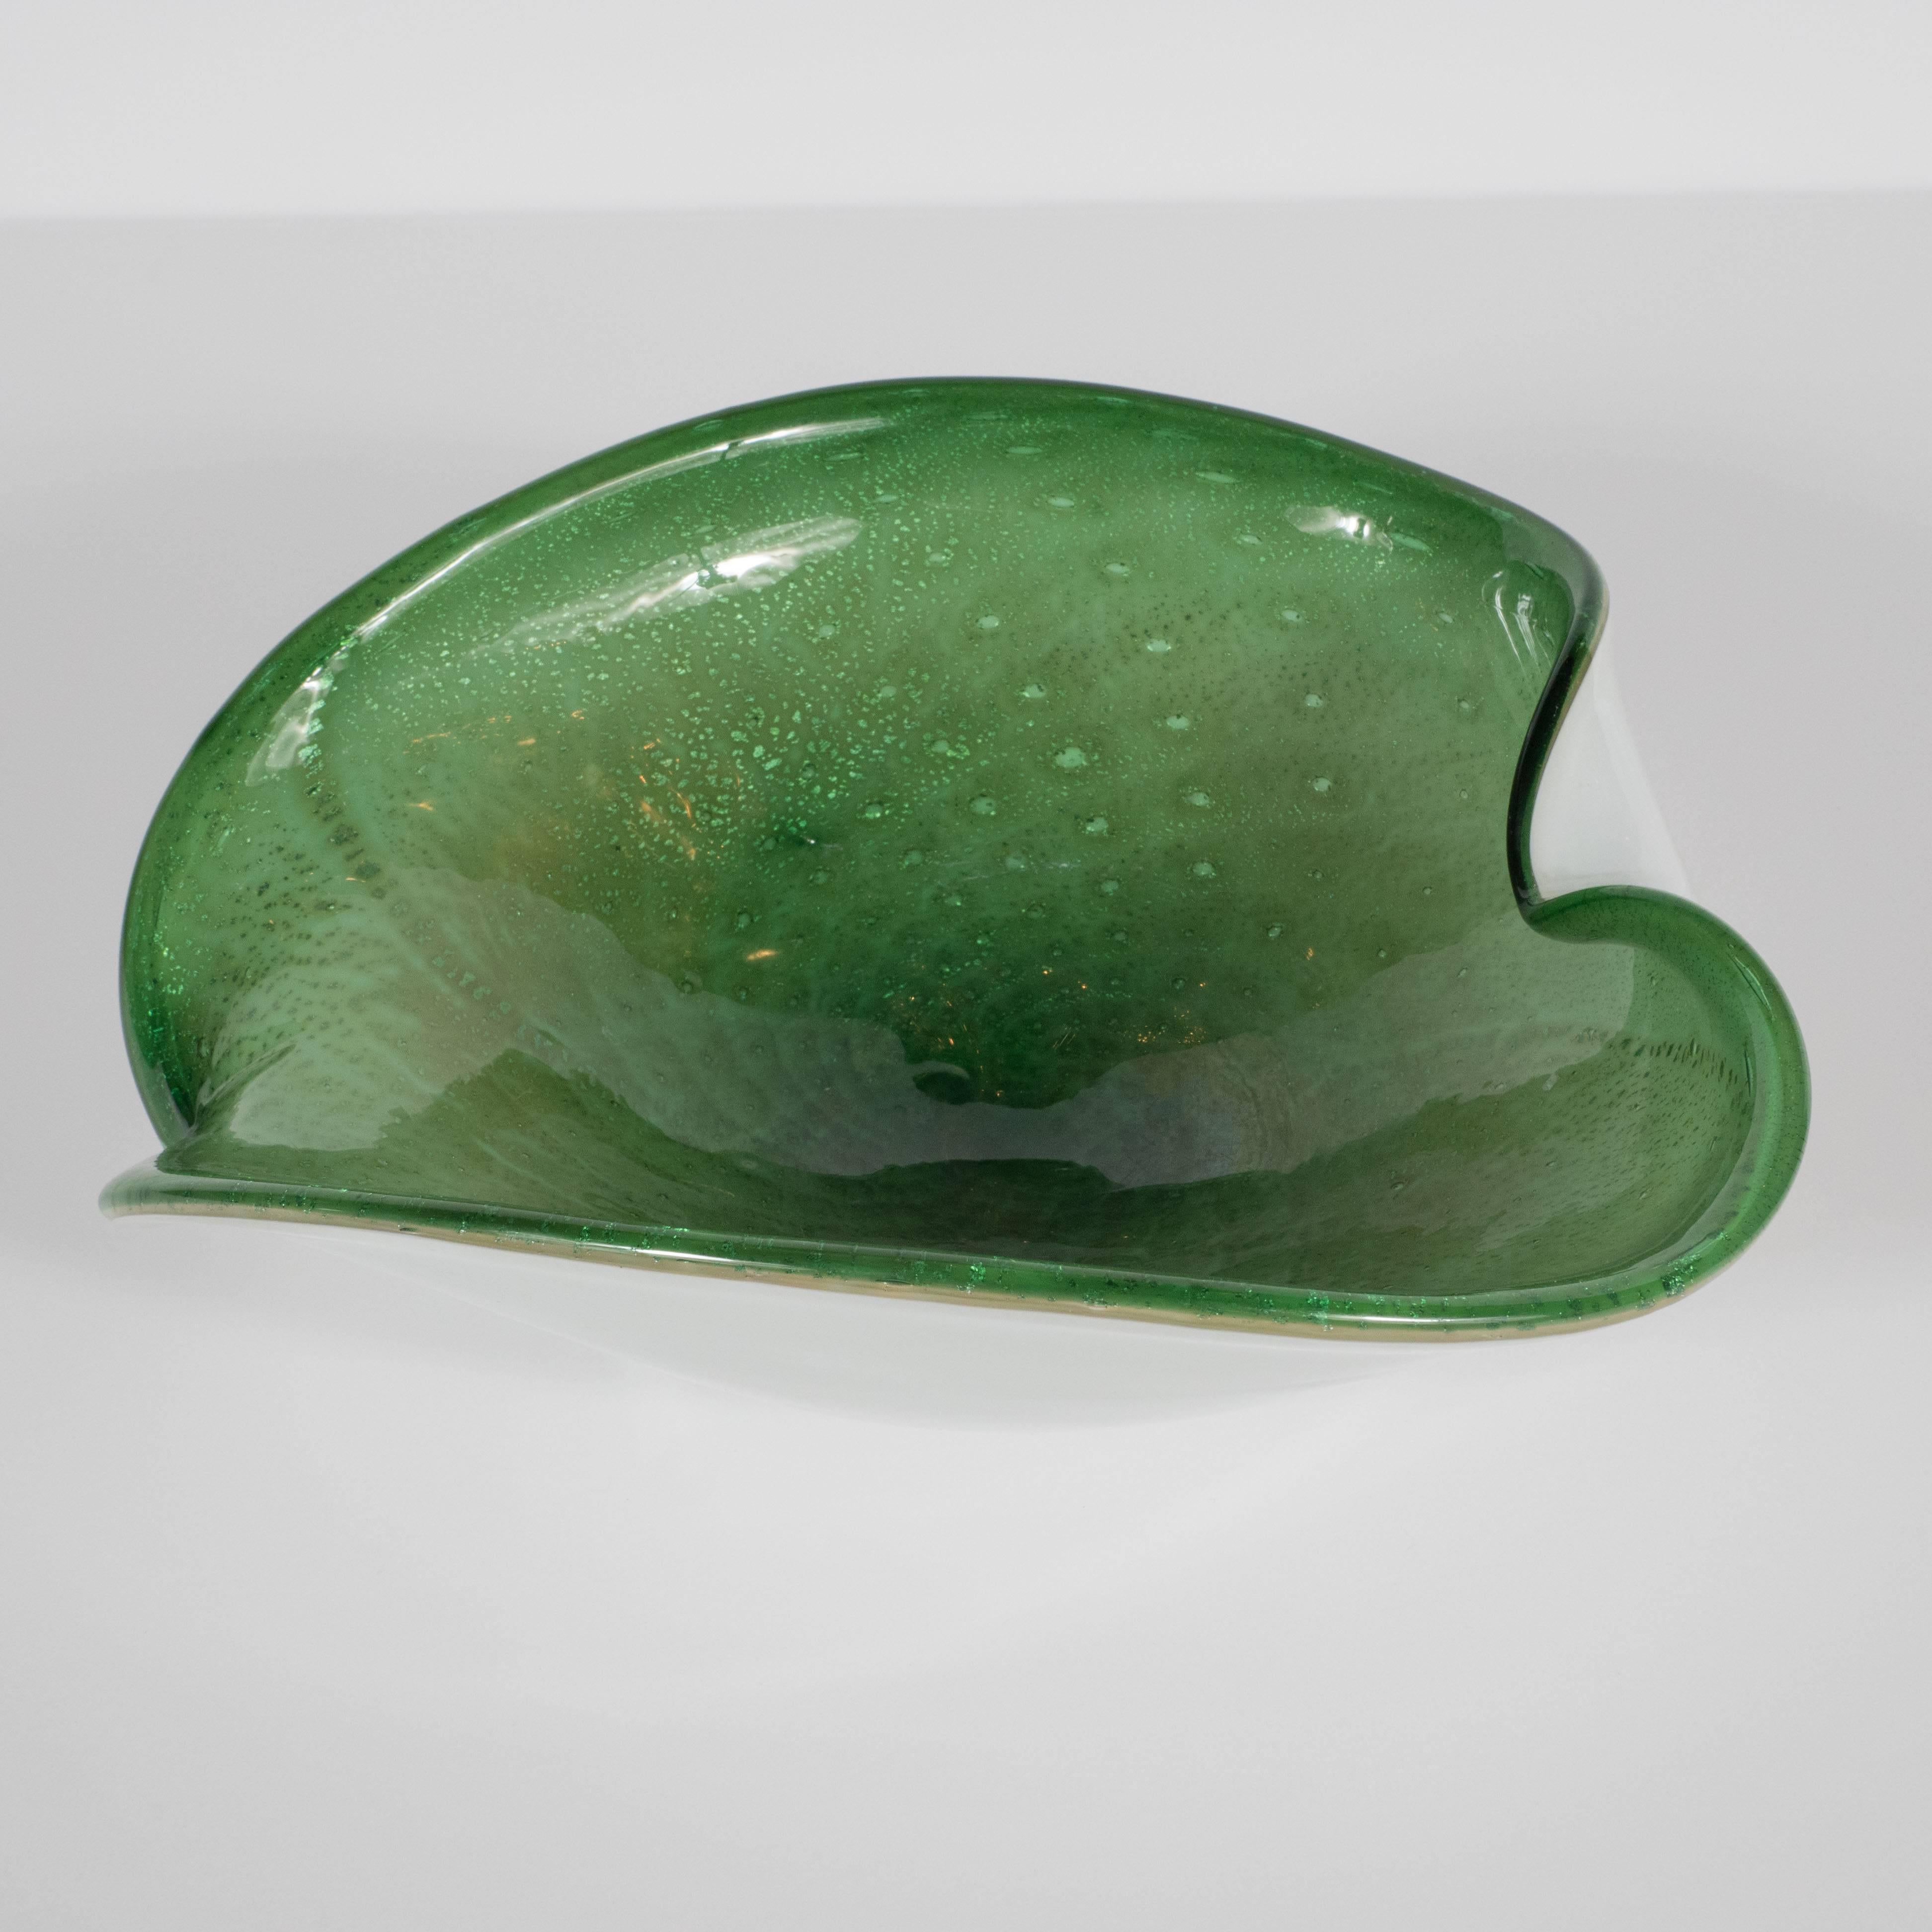 This stunning bowl was handblown in Murano, Italy- the fabled island off the coast of Venice- circa 1950, employing the same techniques that artisans have used for centuries to produce the world's most revered glass products. This piece represents a